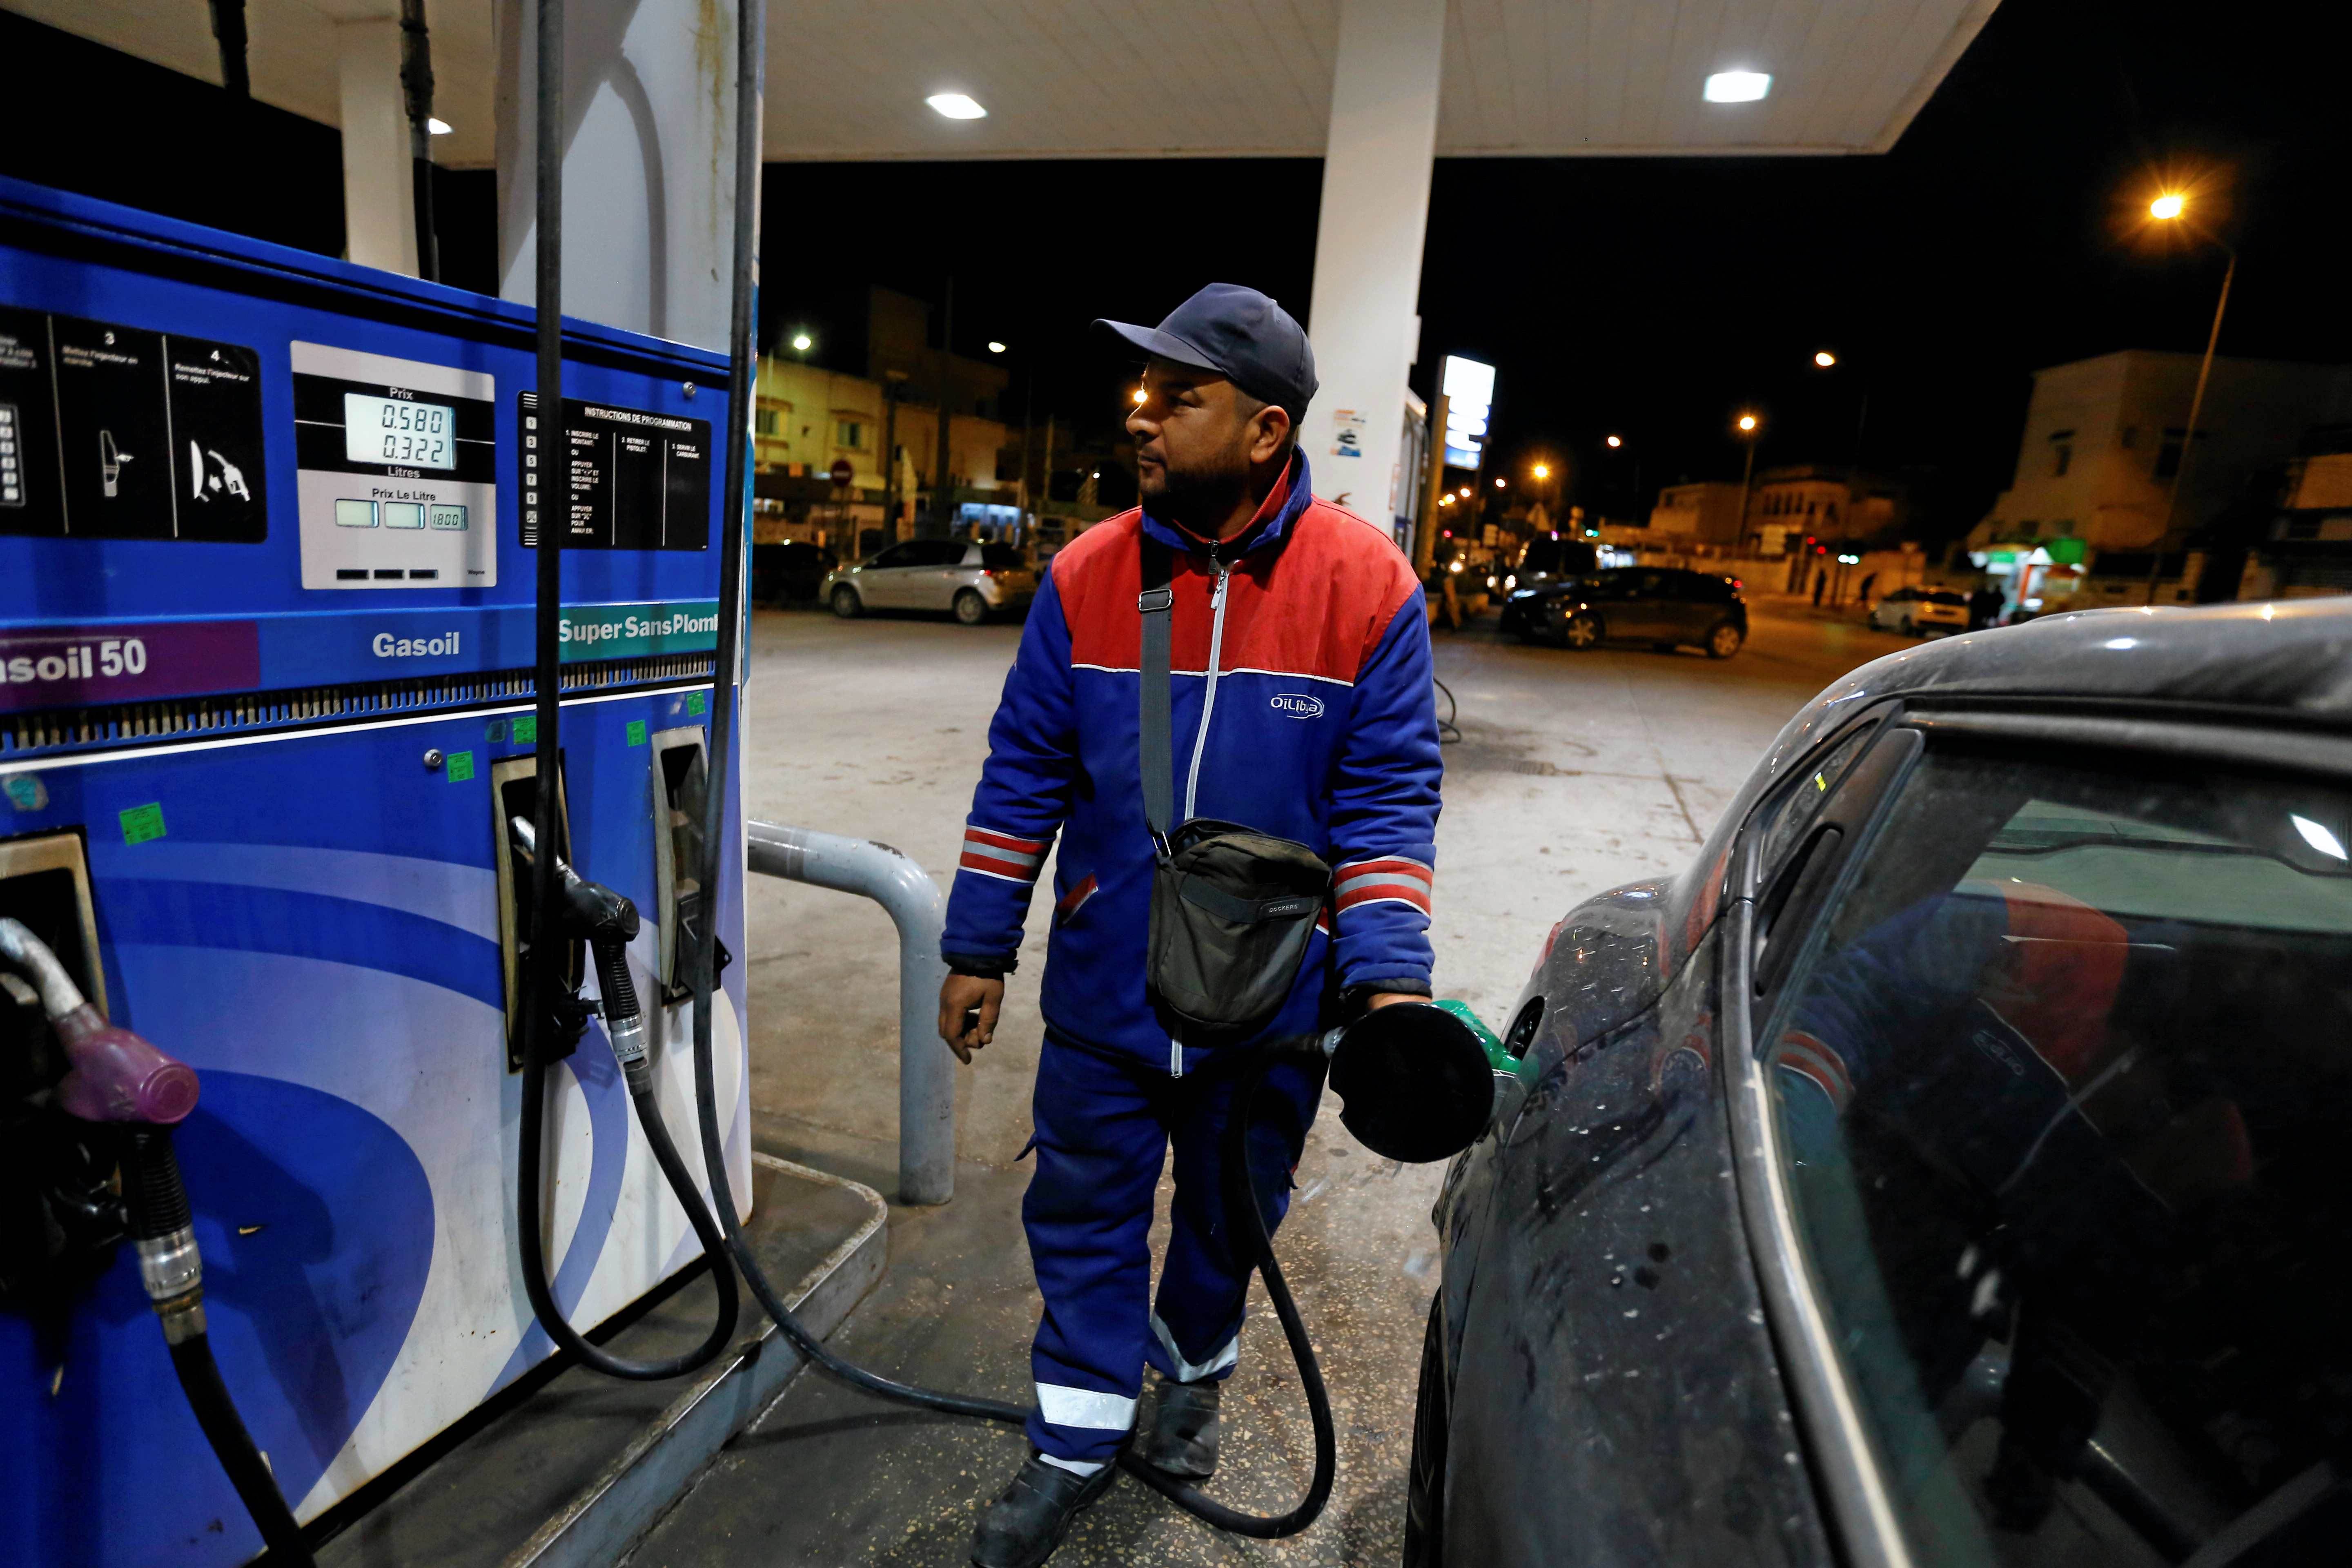 A gas station attendant pumps fuel into a customer's car at a gas station in Tunis